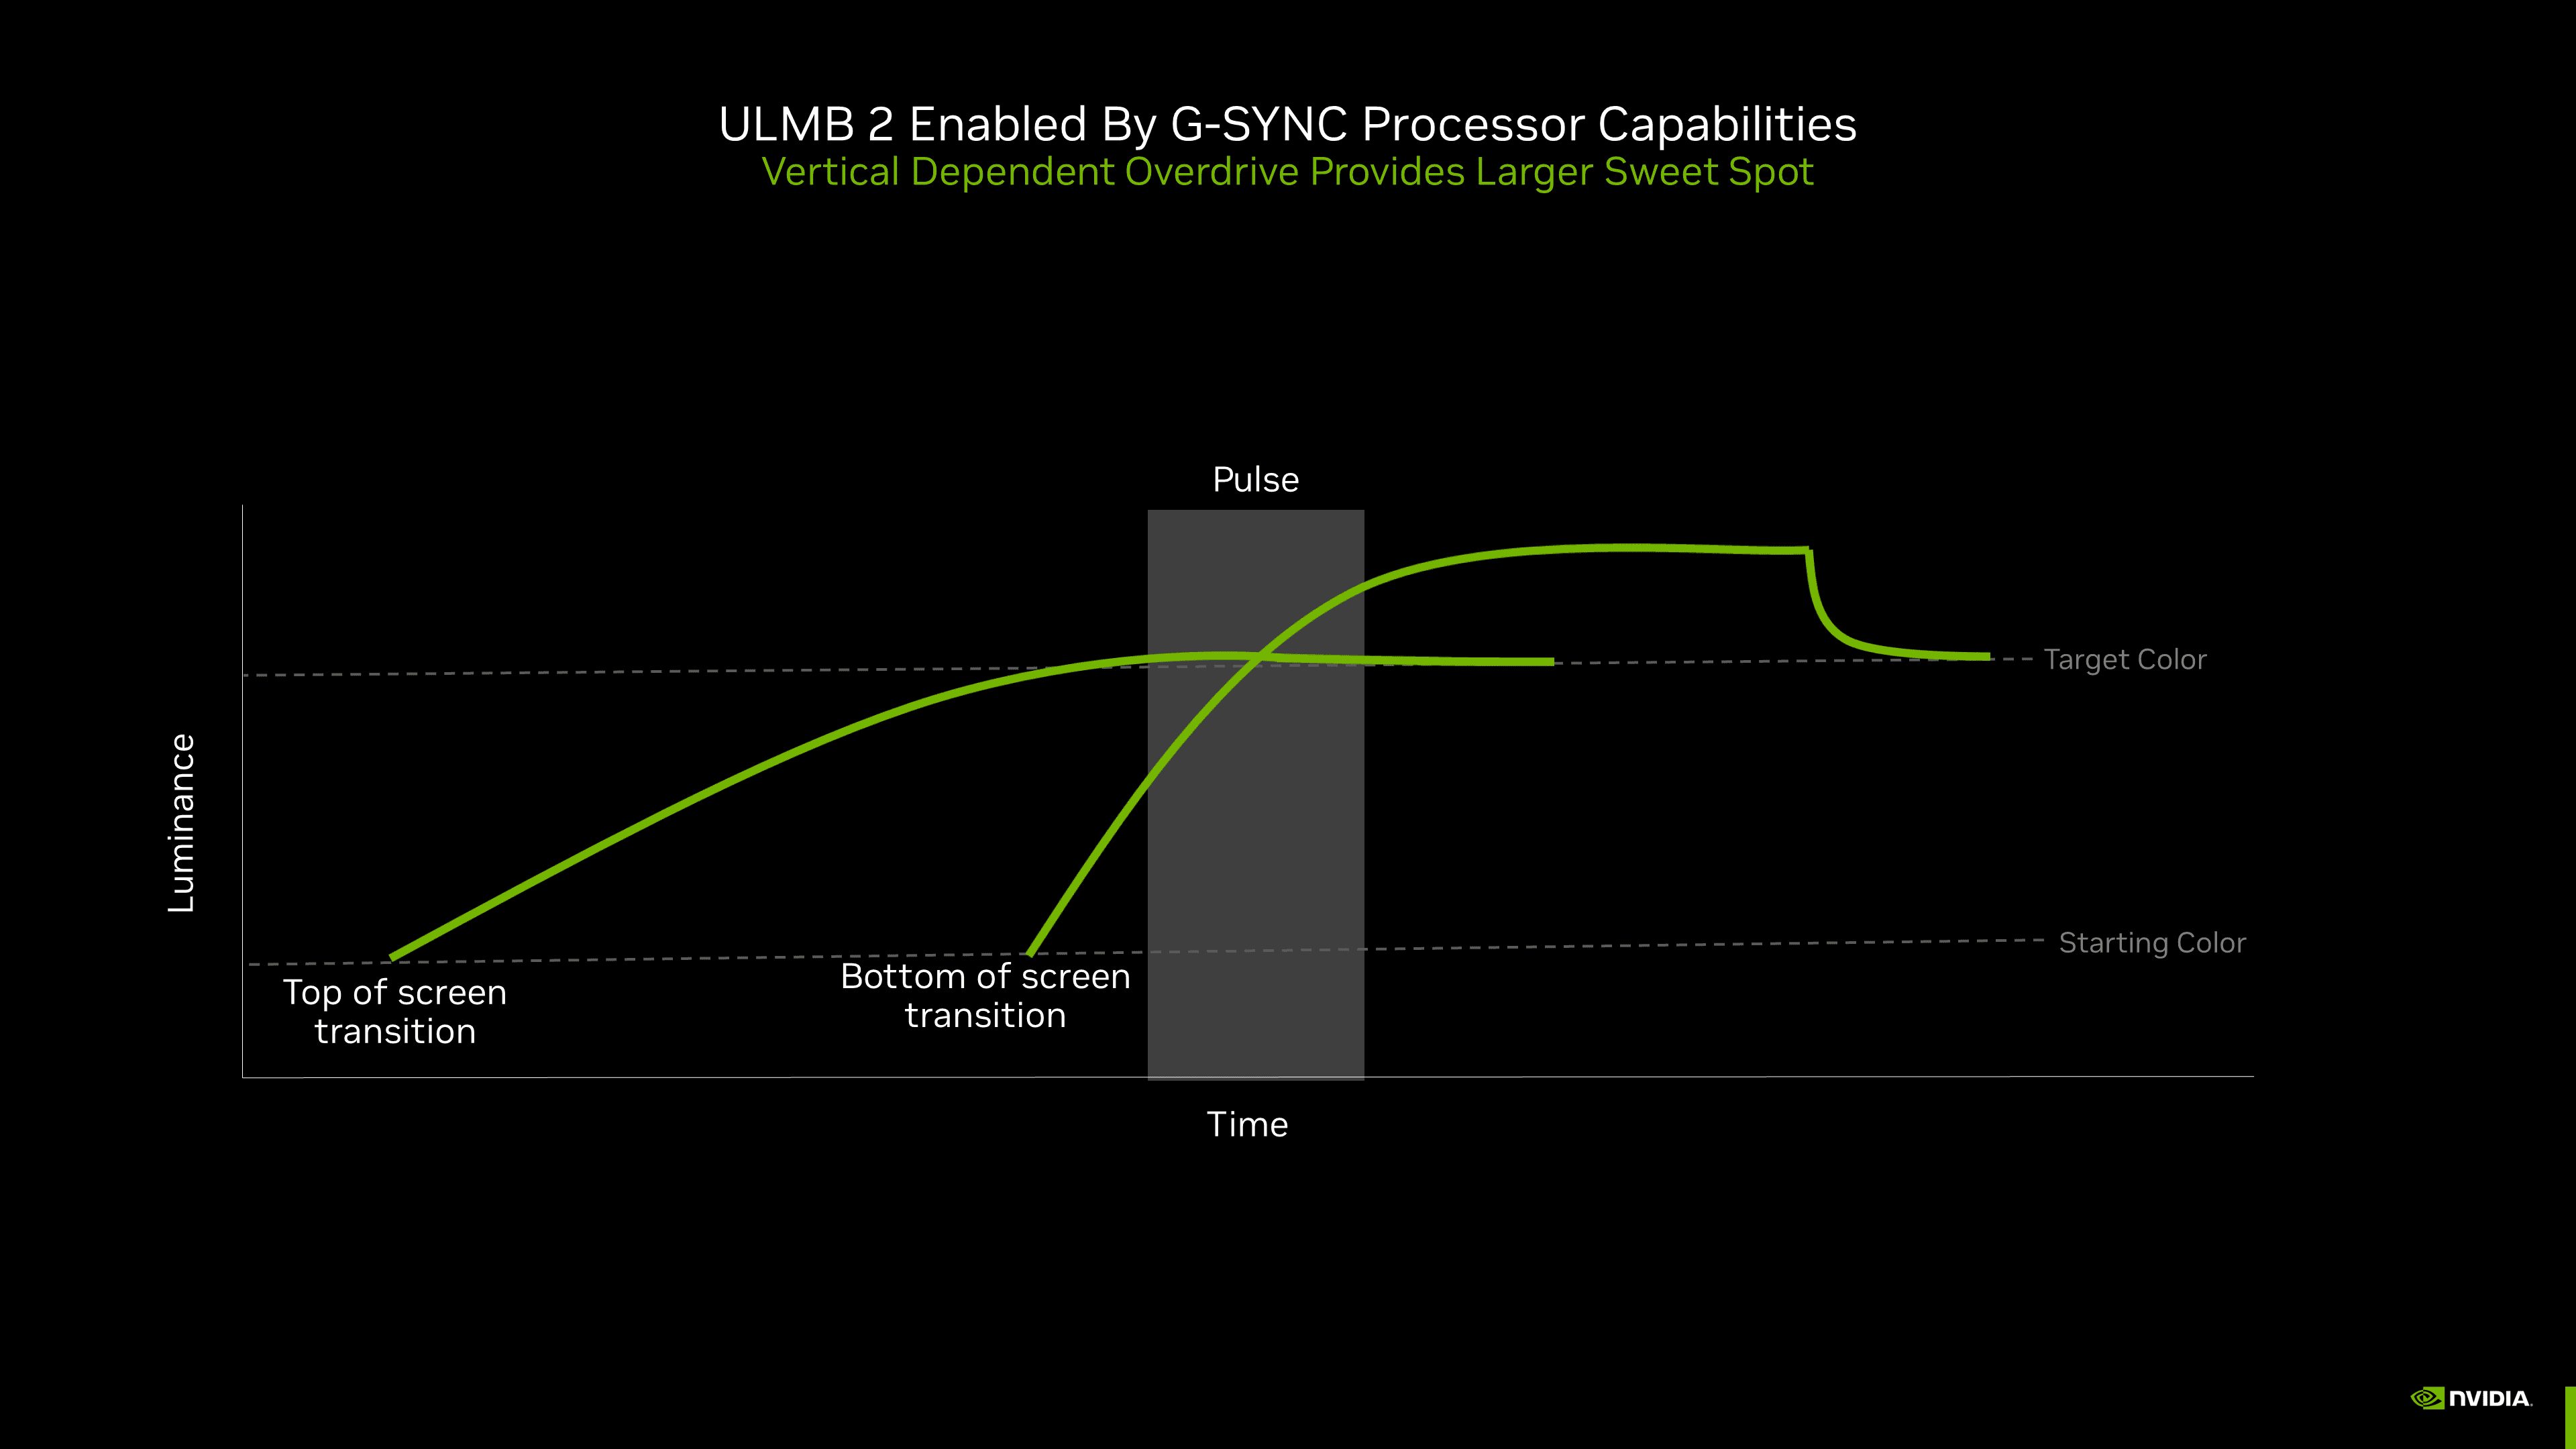 nvidia-g-sync-ulmb2-vertical-dependent-overdrive-explainer.png